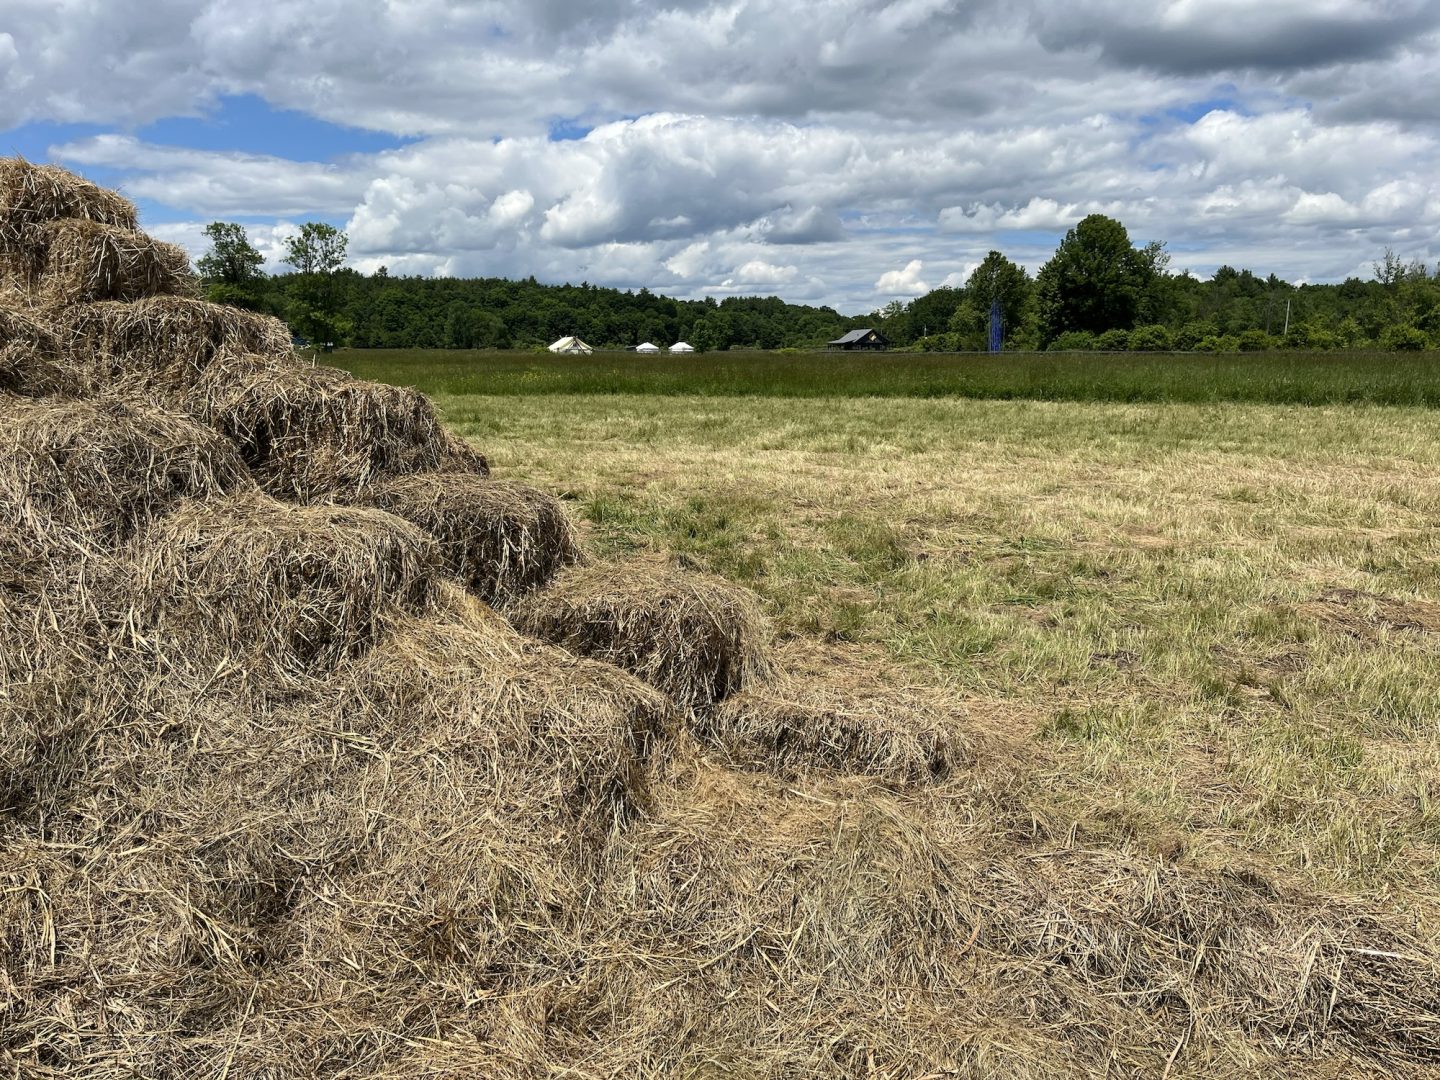 Sculpture made of hay in the foreground, sunny field and cloudy sky in background